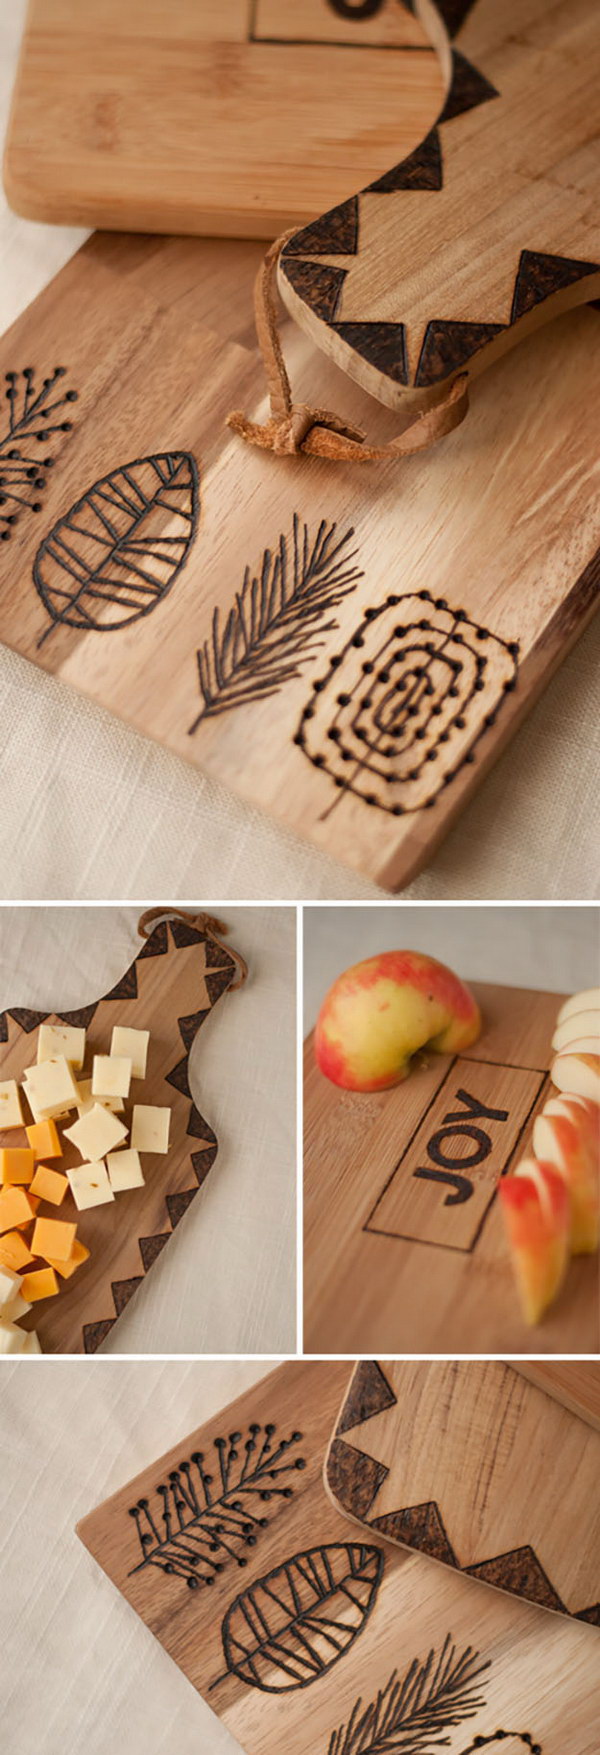 DIY Personalized Gifts for Your Loved Ones - Hative